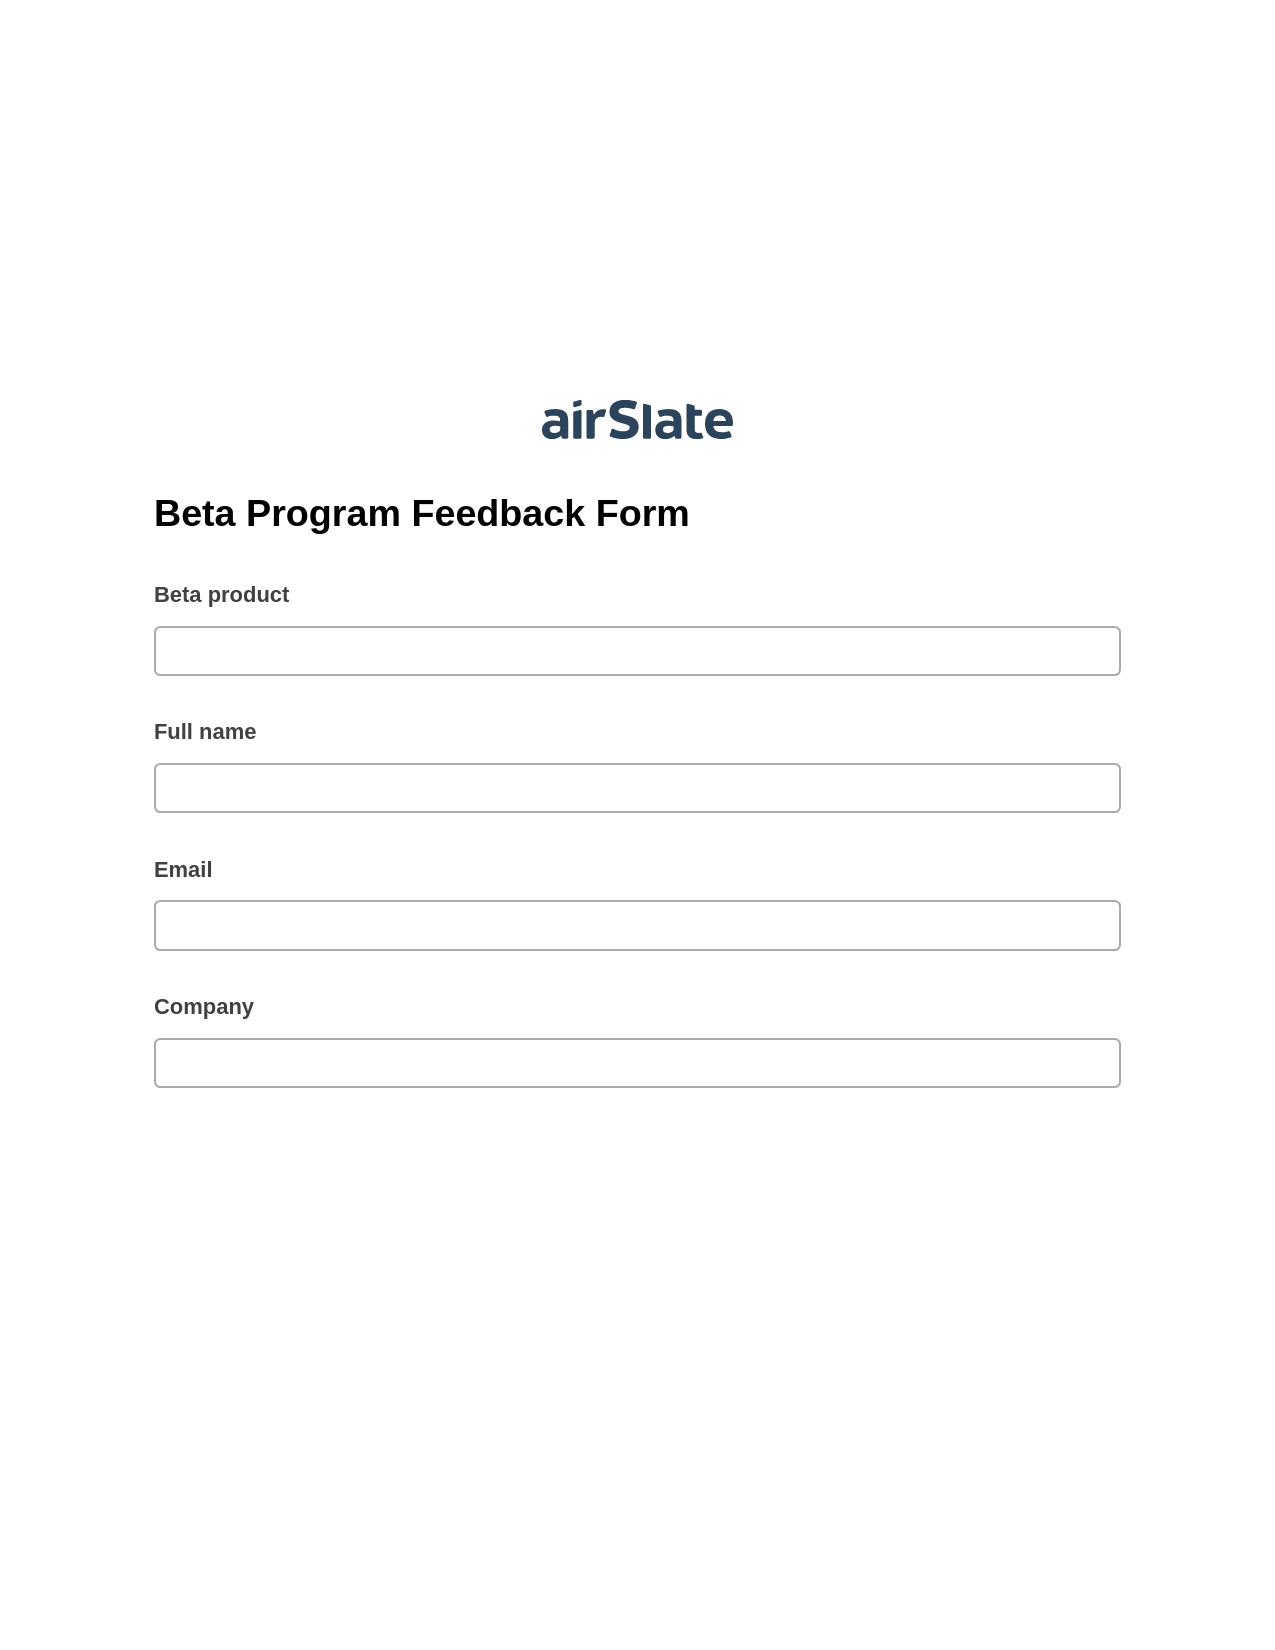 Multirole Beta Program Feedback Form Pre-fill Dropdown from Airtable, Create Salesforce Record Bot, Export to Excel 365 Bot